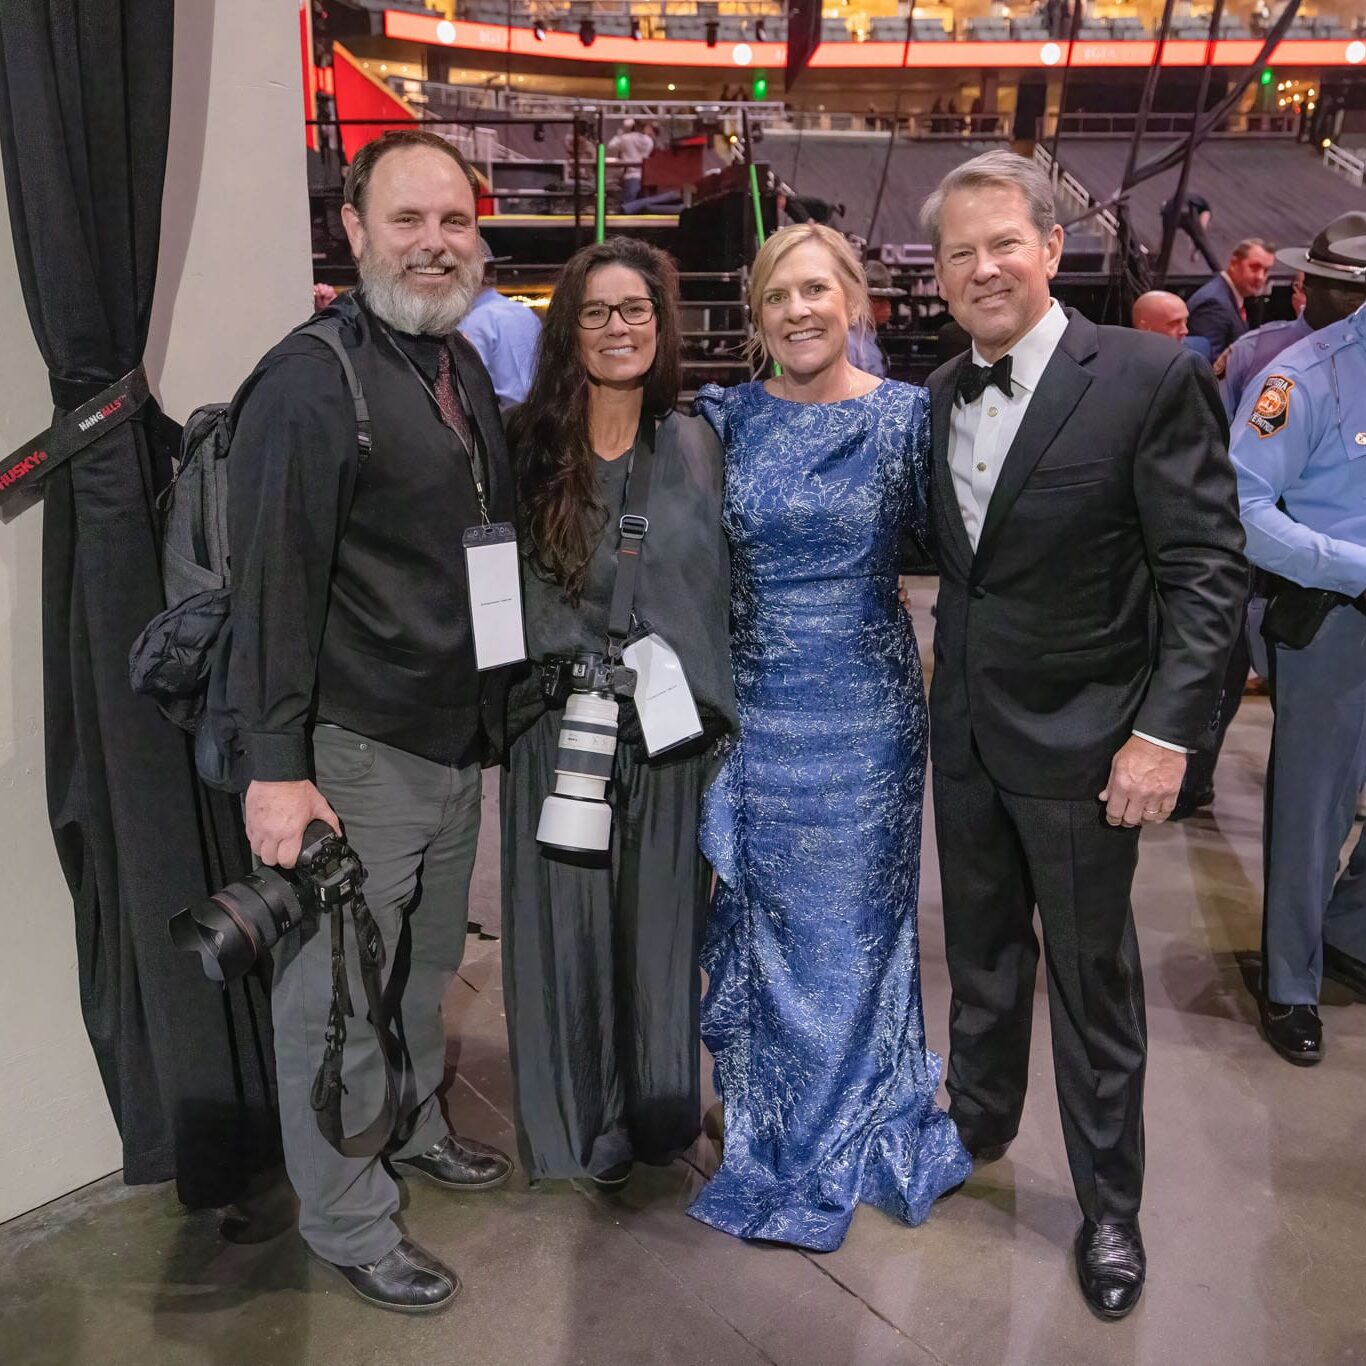 left-to-right-photographers-franklin-ford-and-vikki-ford-with-governor-and-first-lady-of-georgia-brain-kemp-and-marty-kemp-backstage-after-inaugural